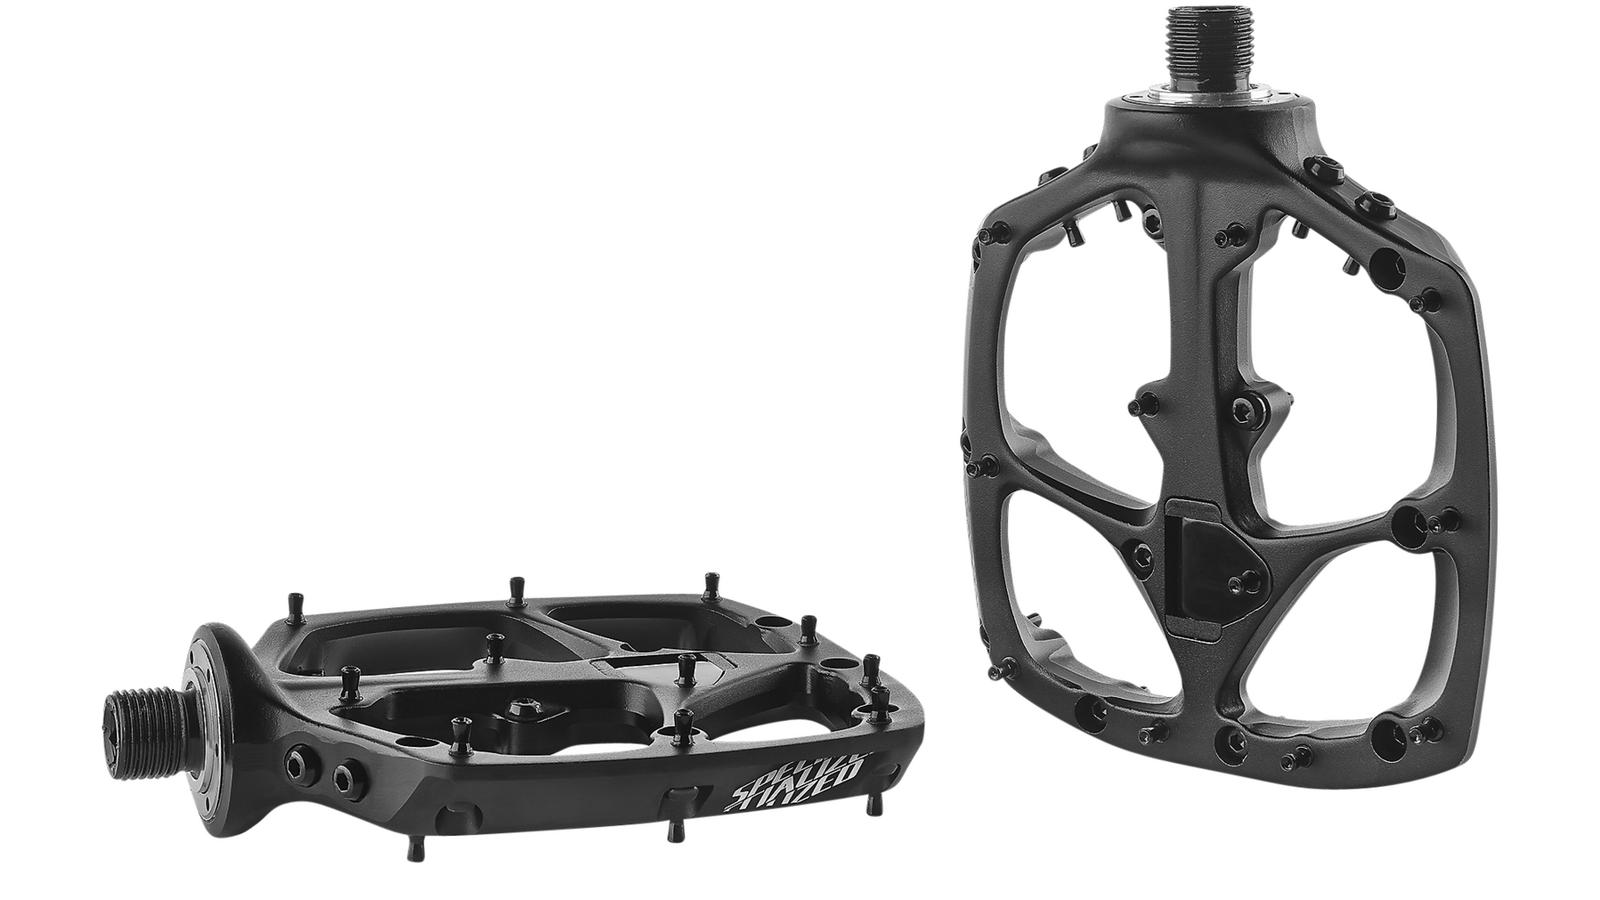 09115-2300-Specialized-Boomslang Platform Pedals-Pedal-Peachtree-Bikes-Atlanta